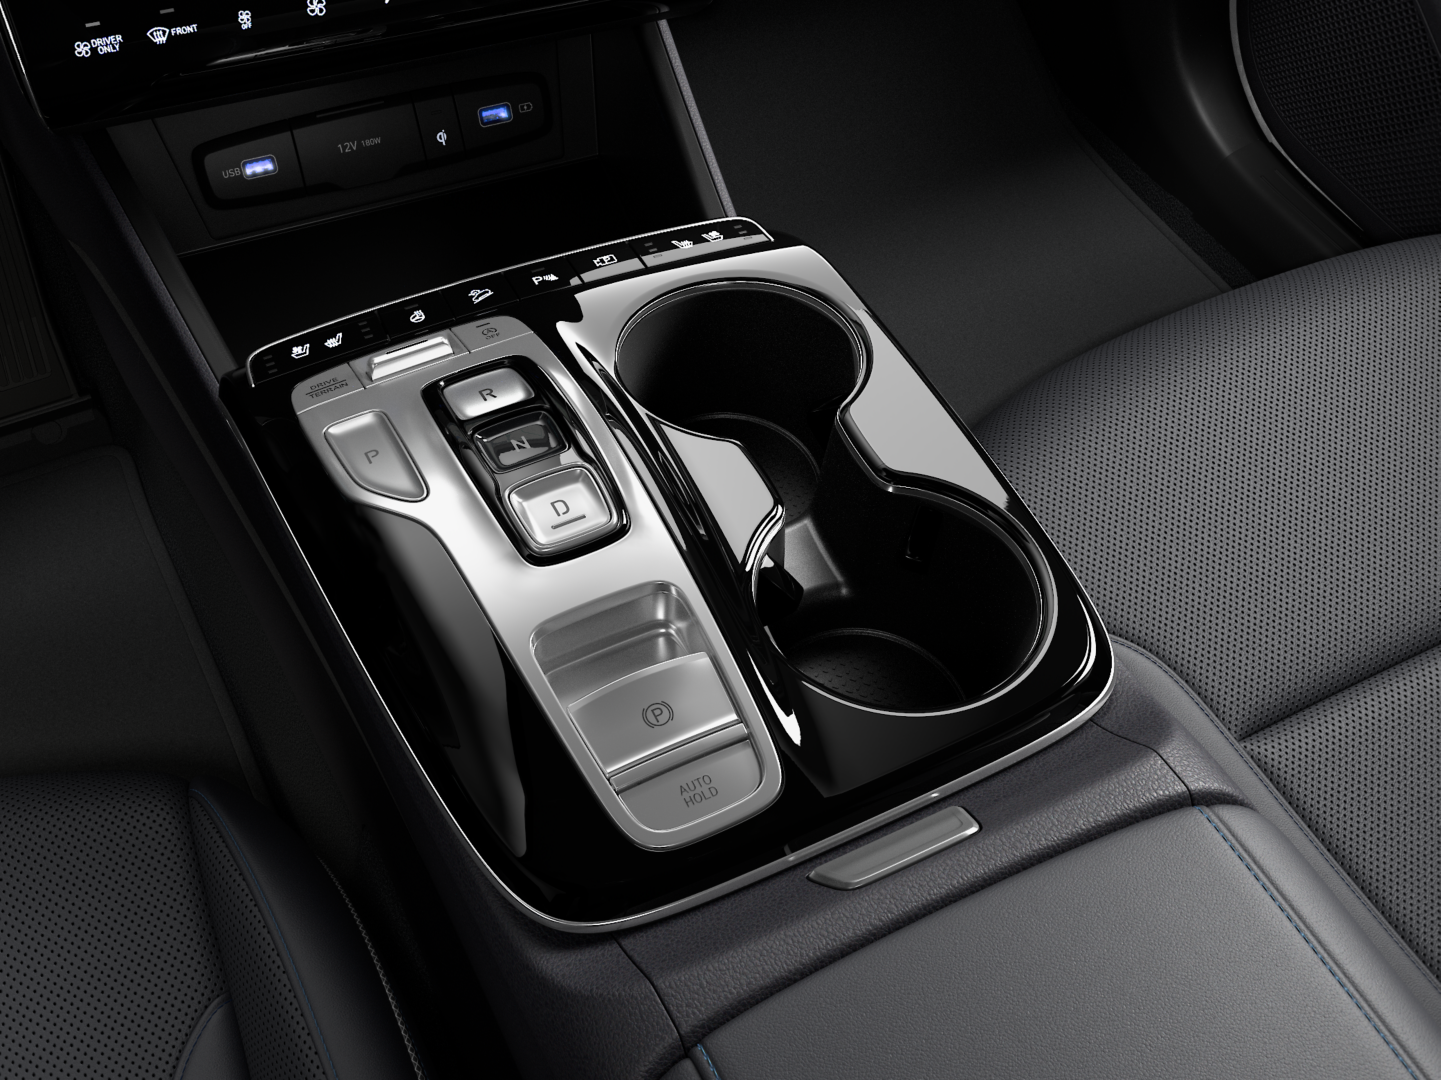 The button type shift by wire  of the All-New Hyundai Tucson Hybrid compact SUV.